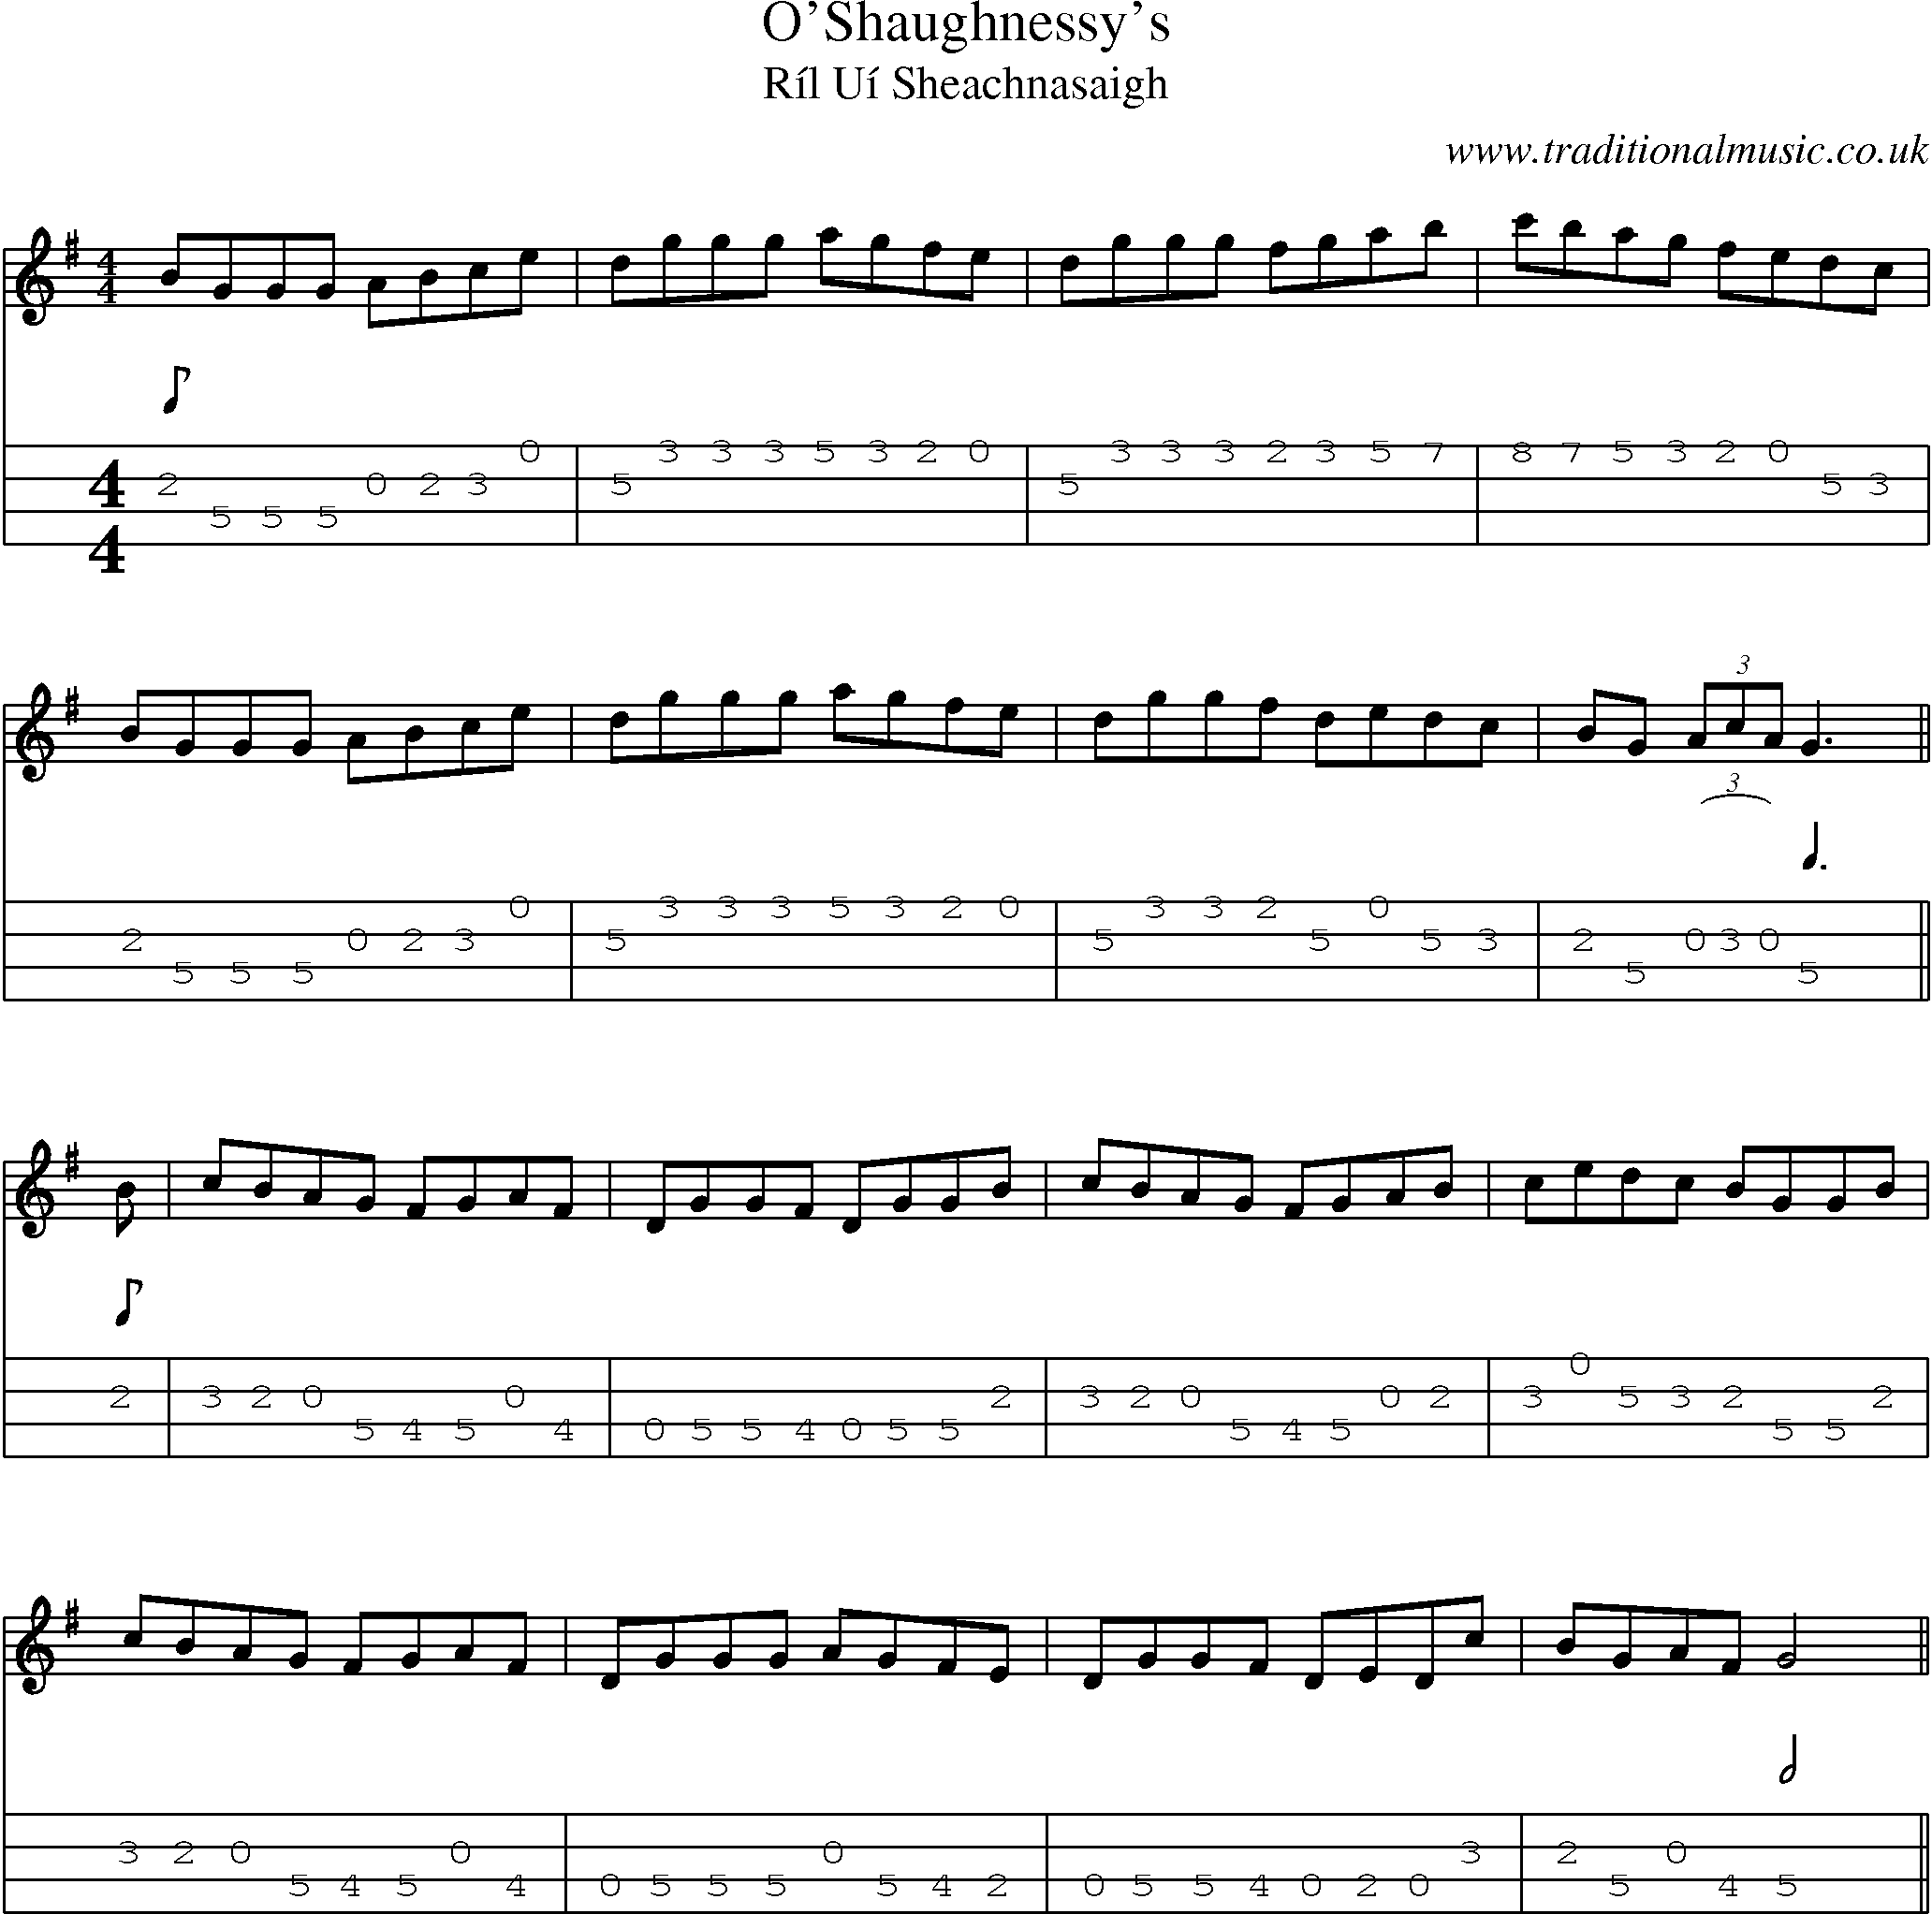 Music Score and Mandolin Tabs for Oshaughnessys